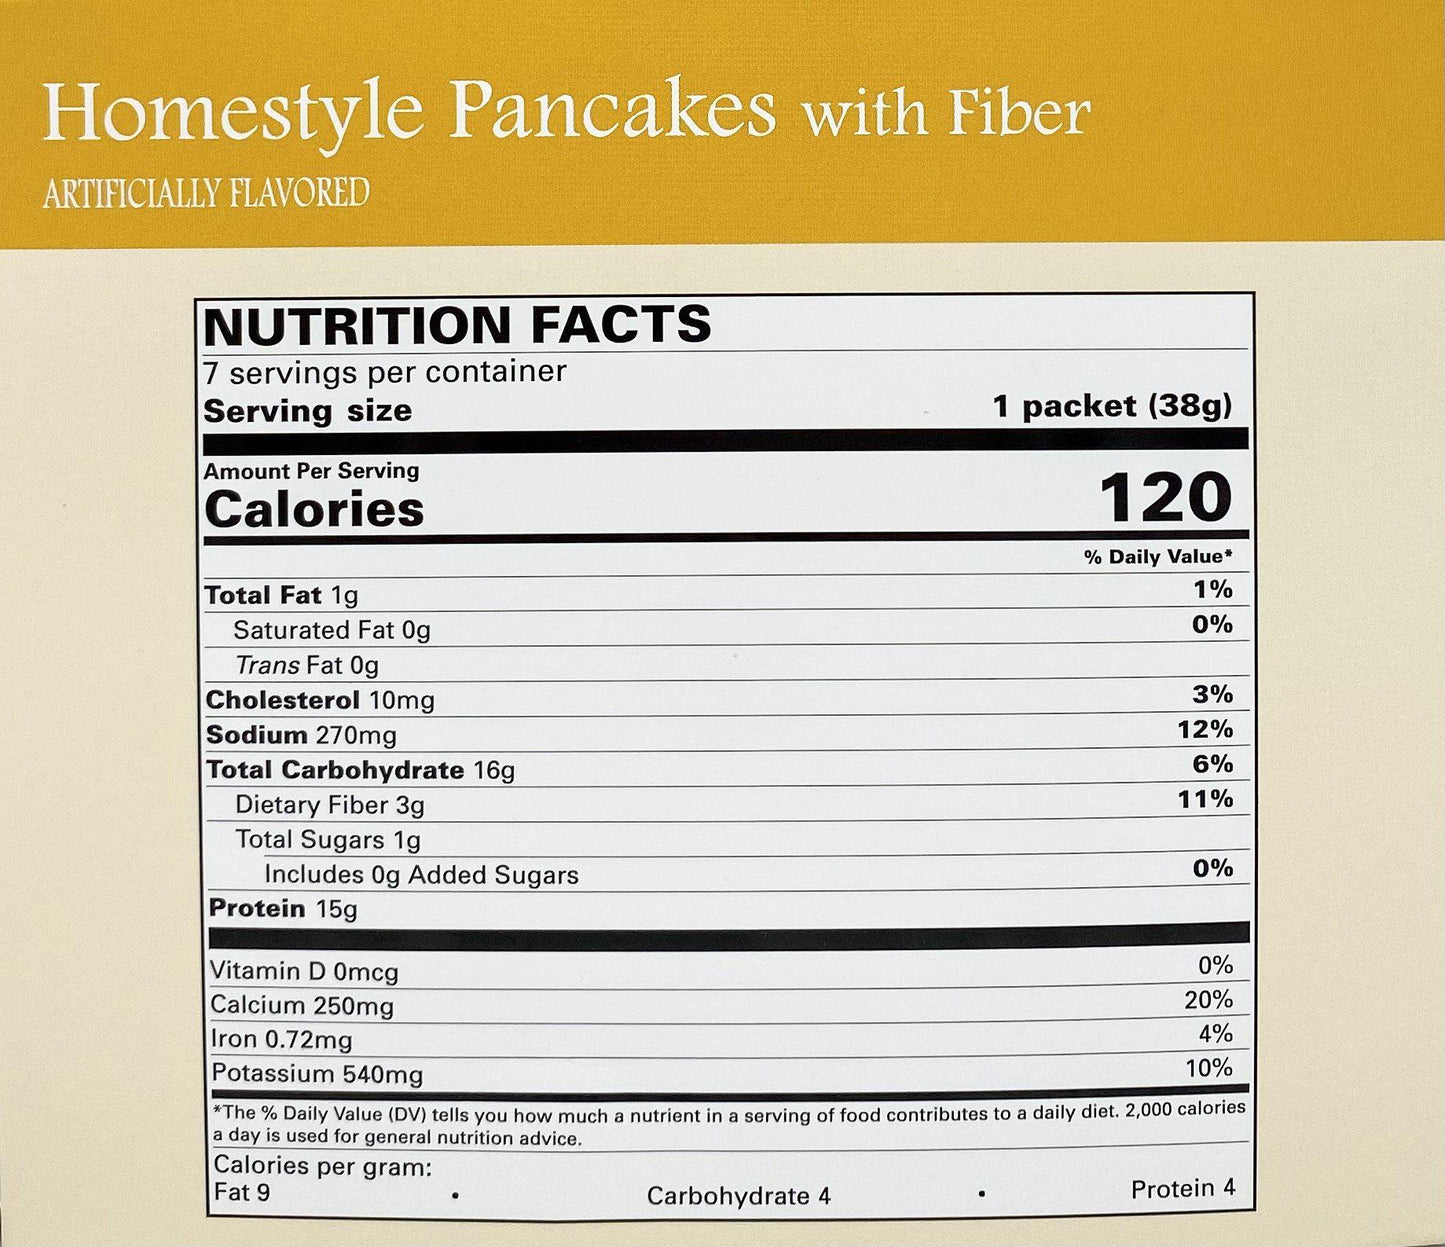 Homestyle Pancakes with Fiber Nutrition Facts - BestMed - Doctors Weight Loss